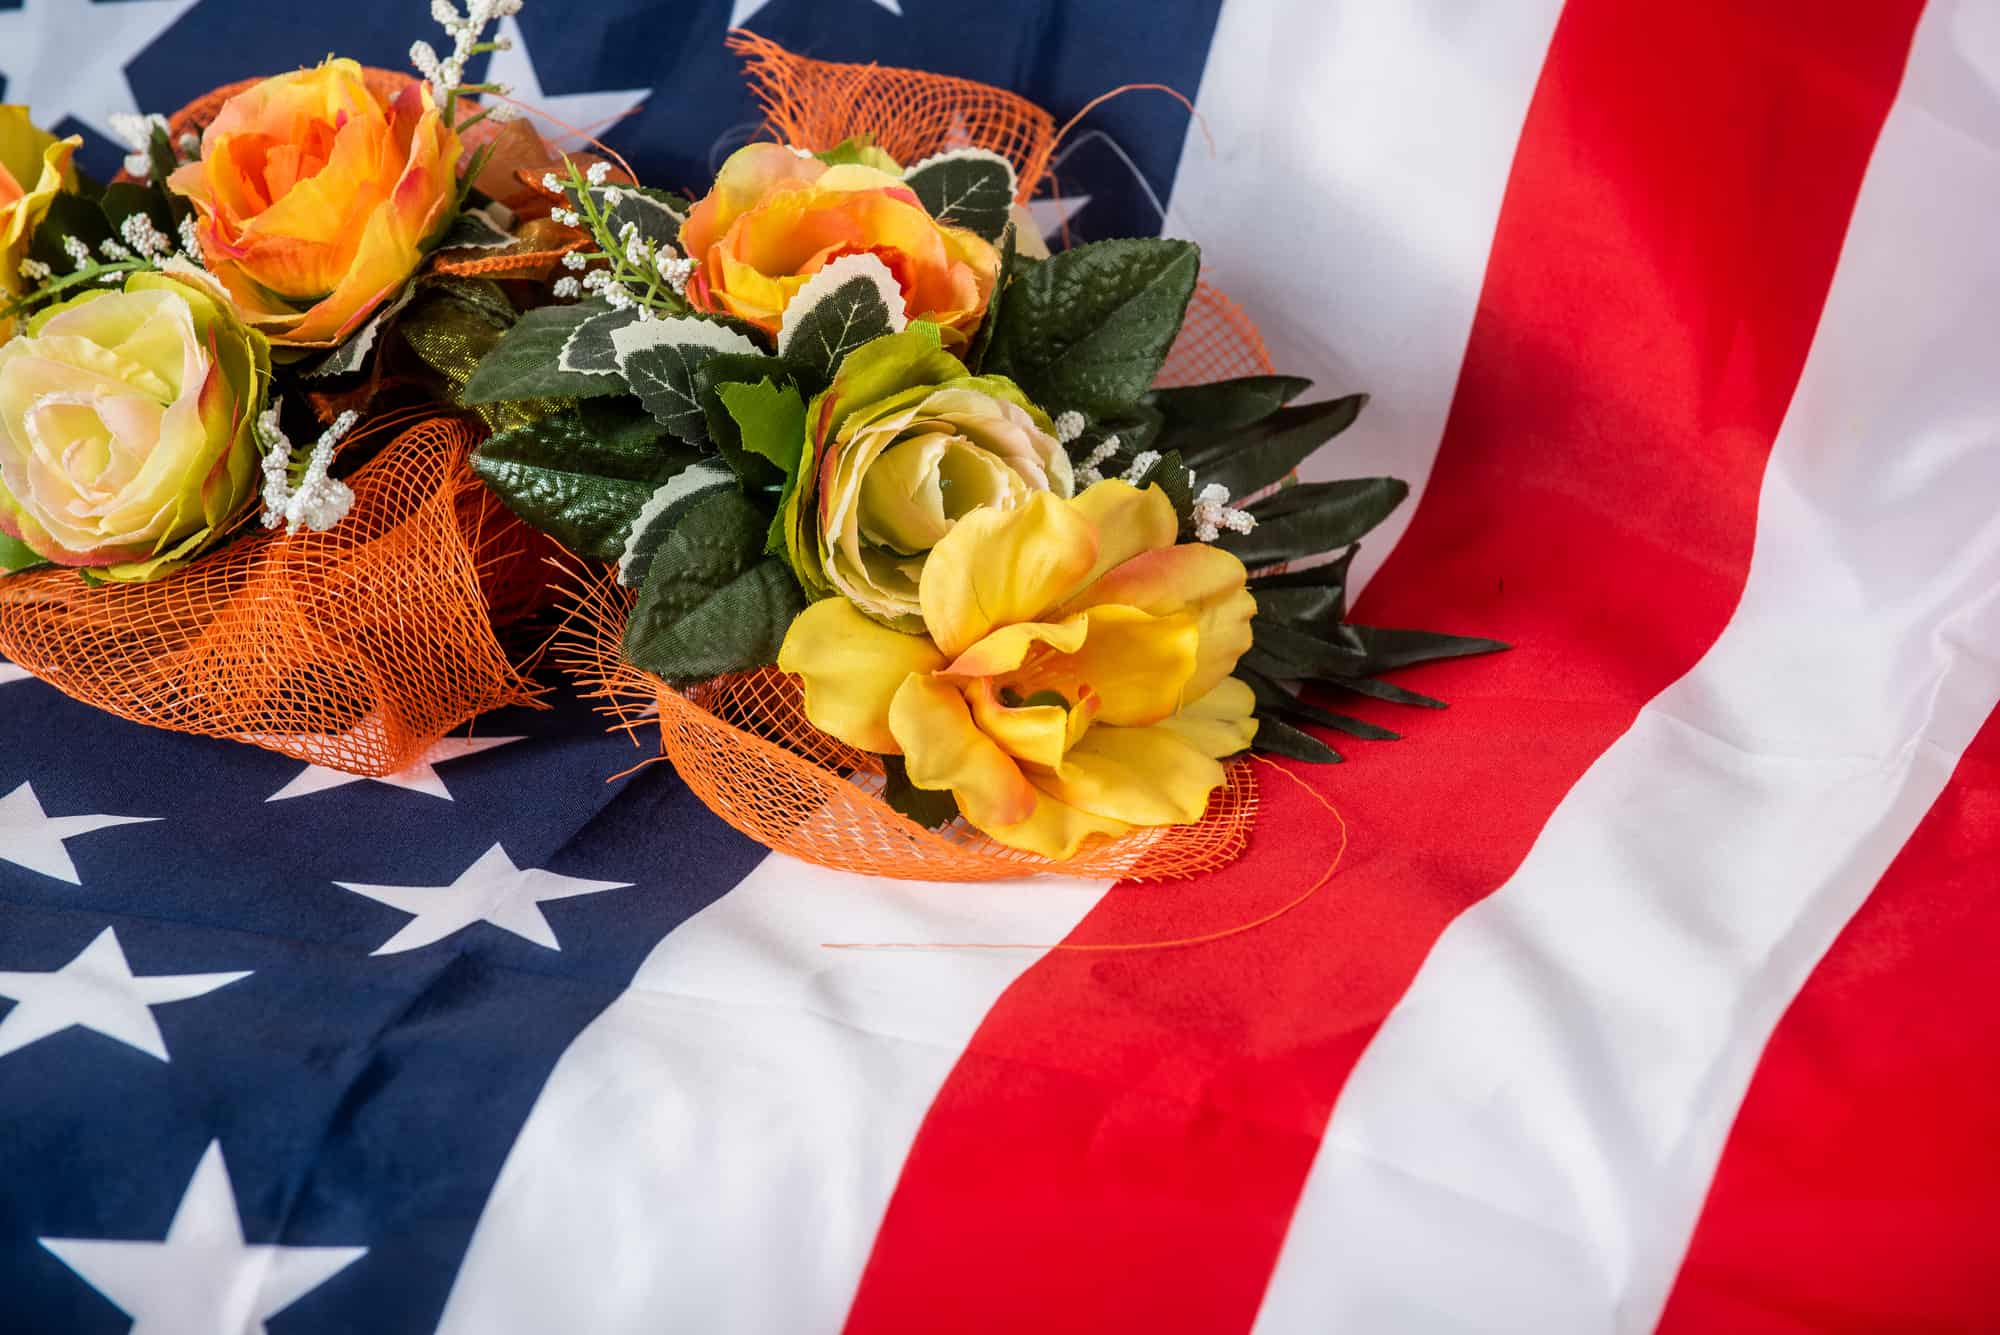 Visit Mayfield Florist on this Veterans Day for the very best flowers and plants to honor a Veteran